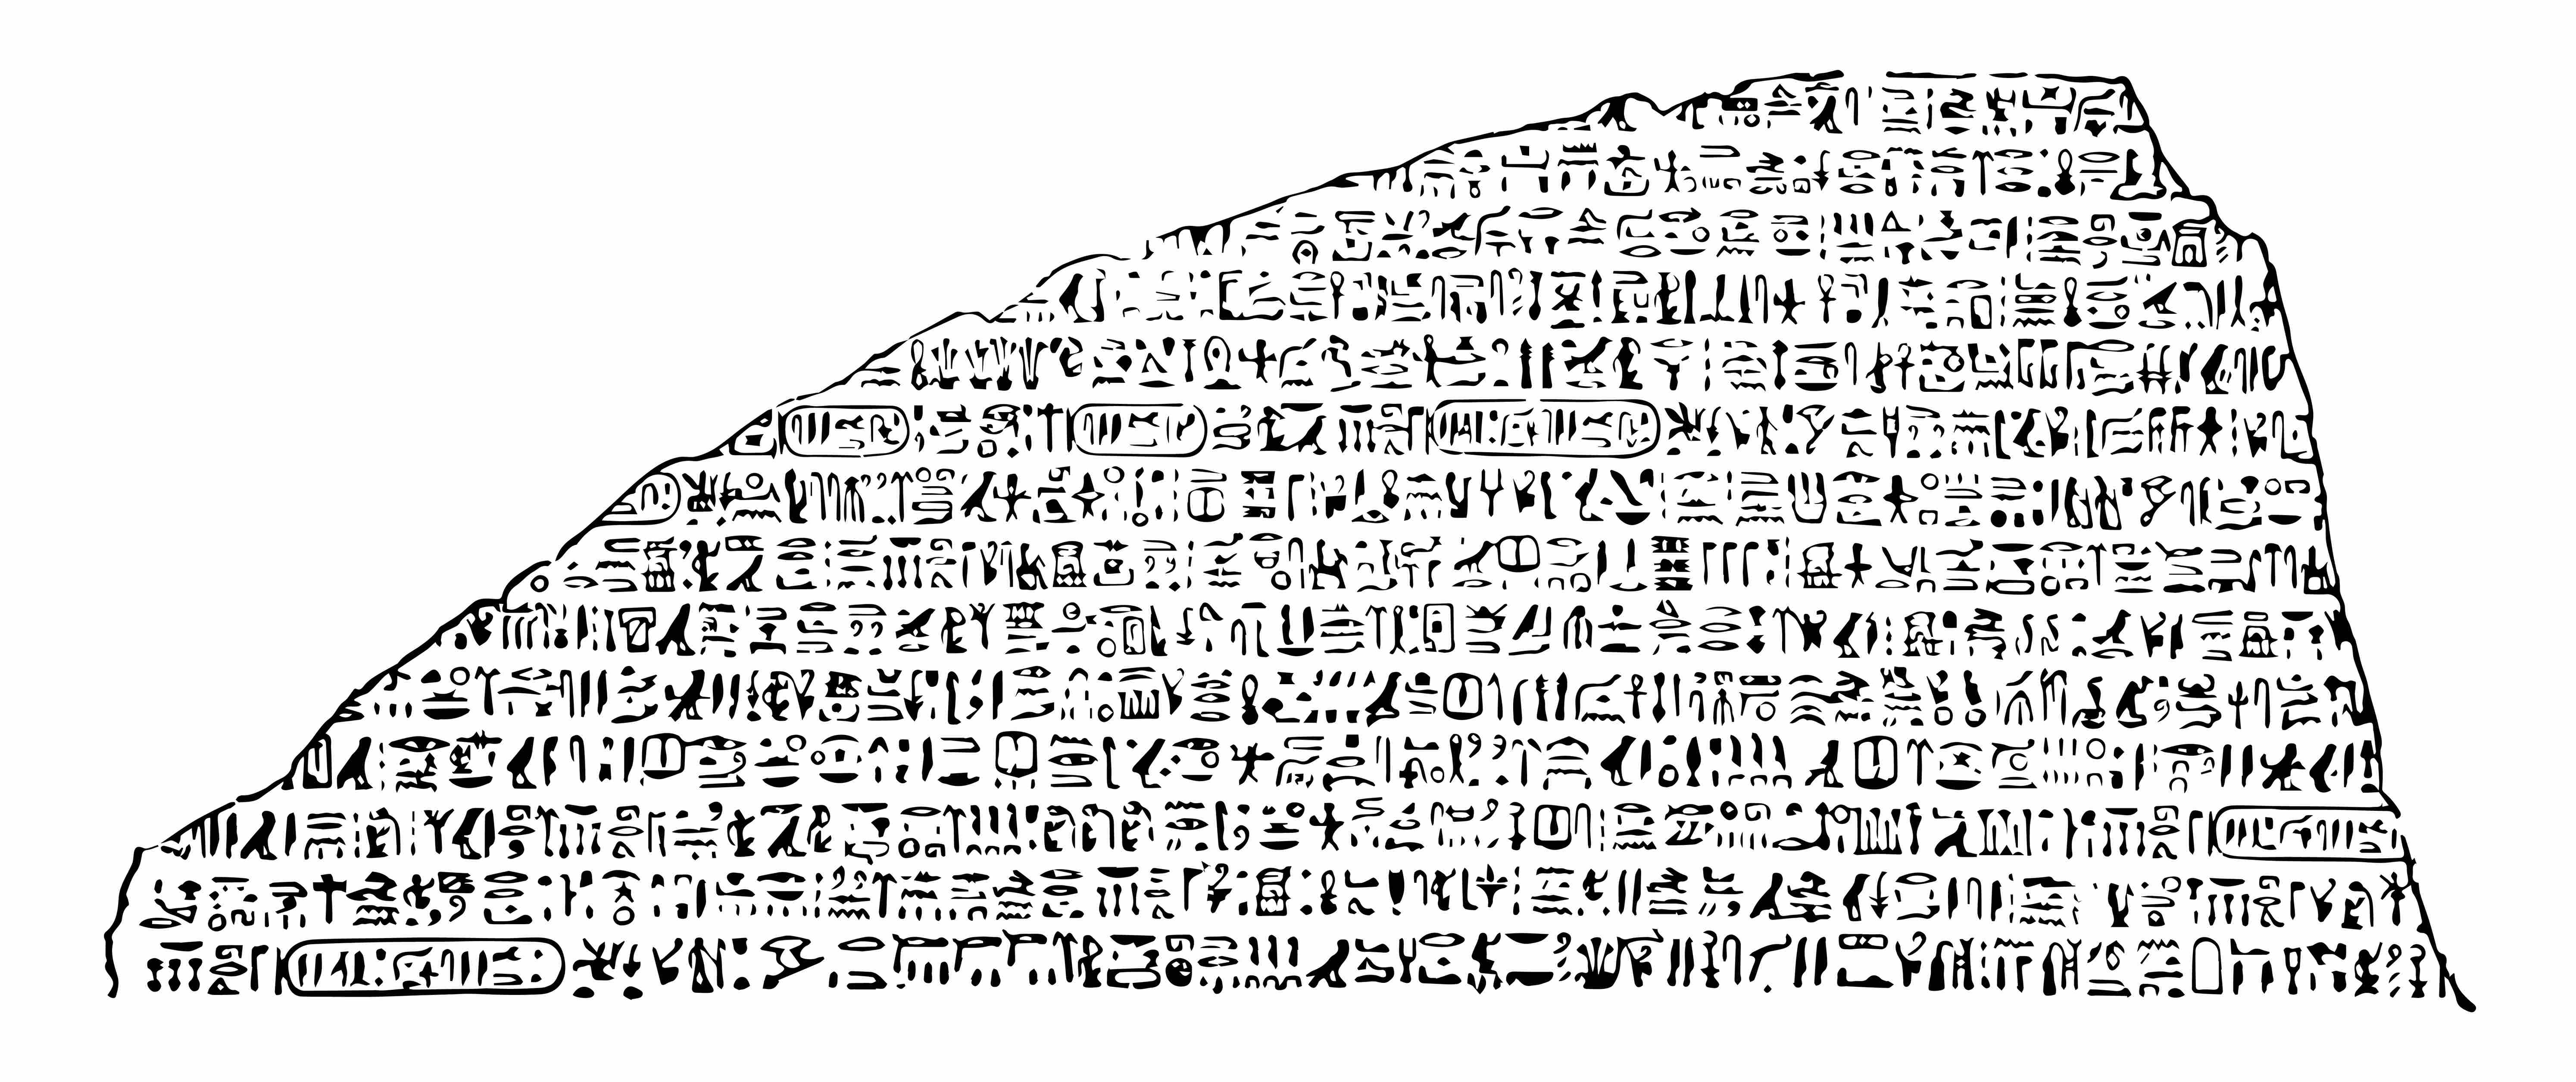  Portion of the copy of Rosetta Stone